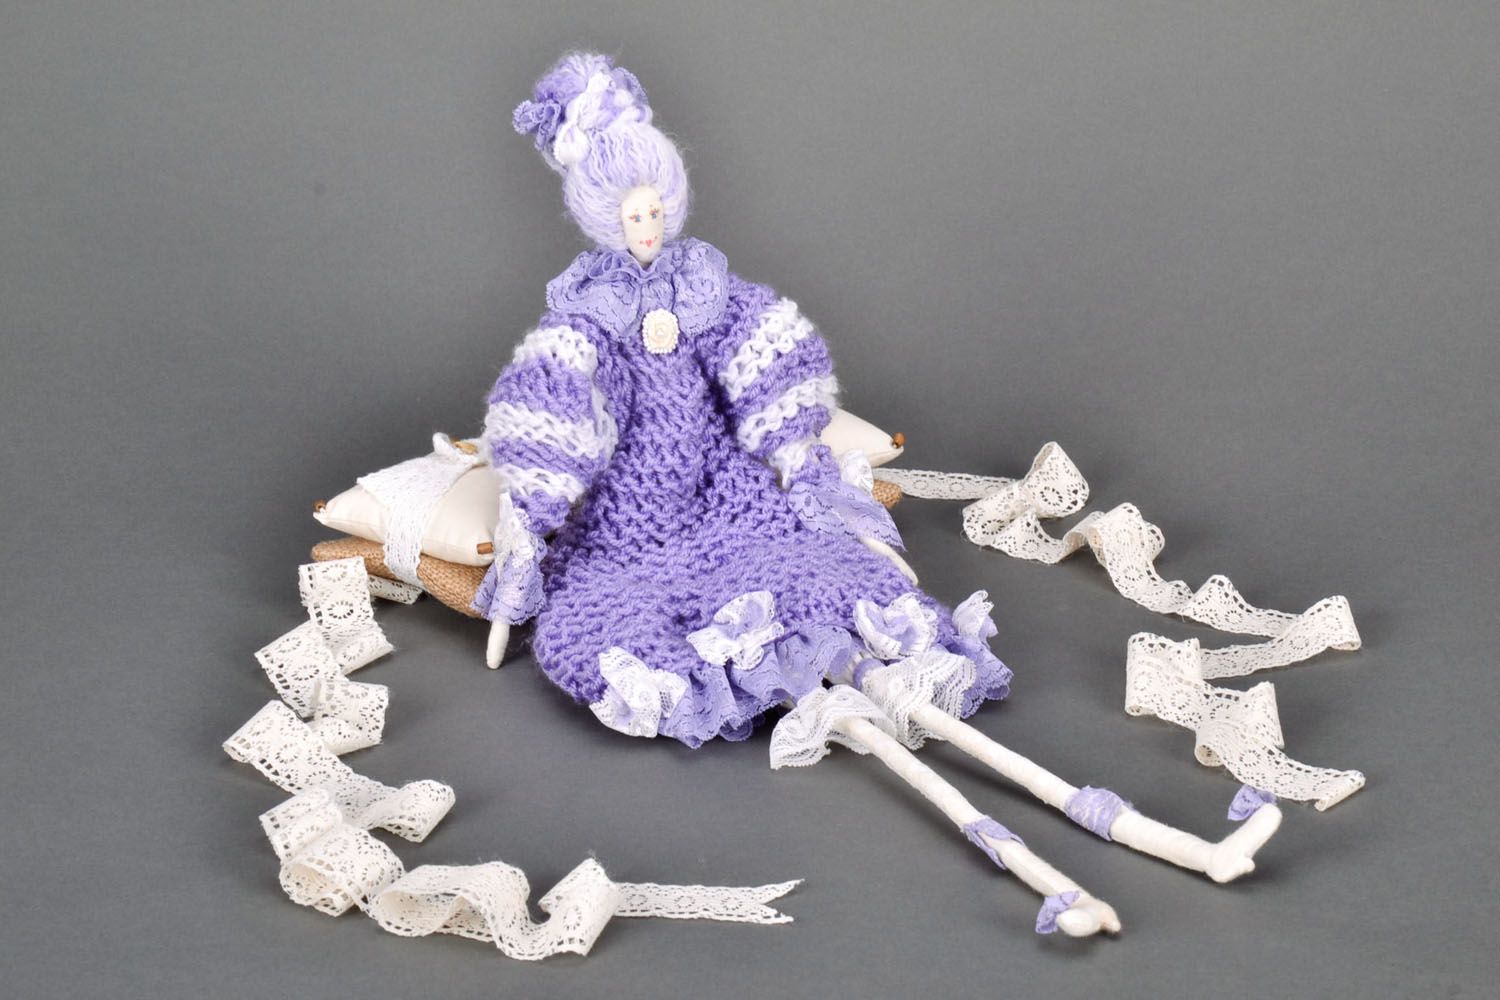 Knitted interior doll photo 1